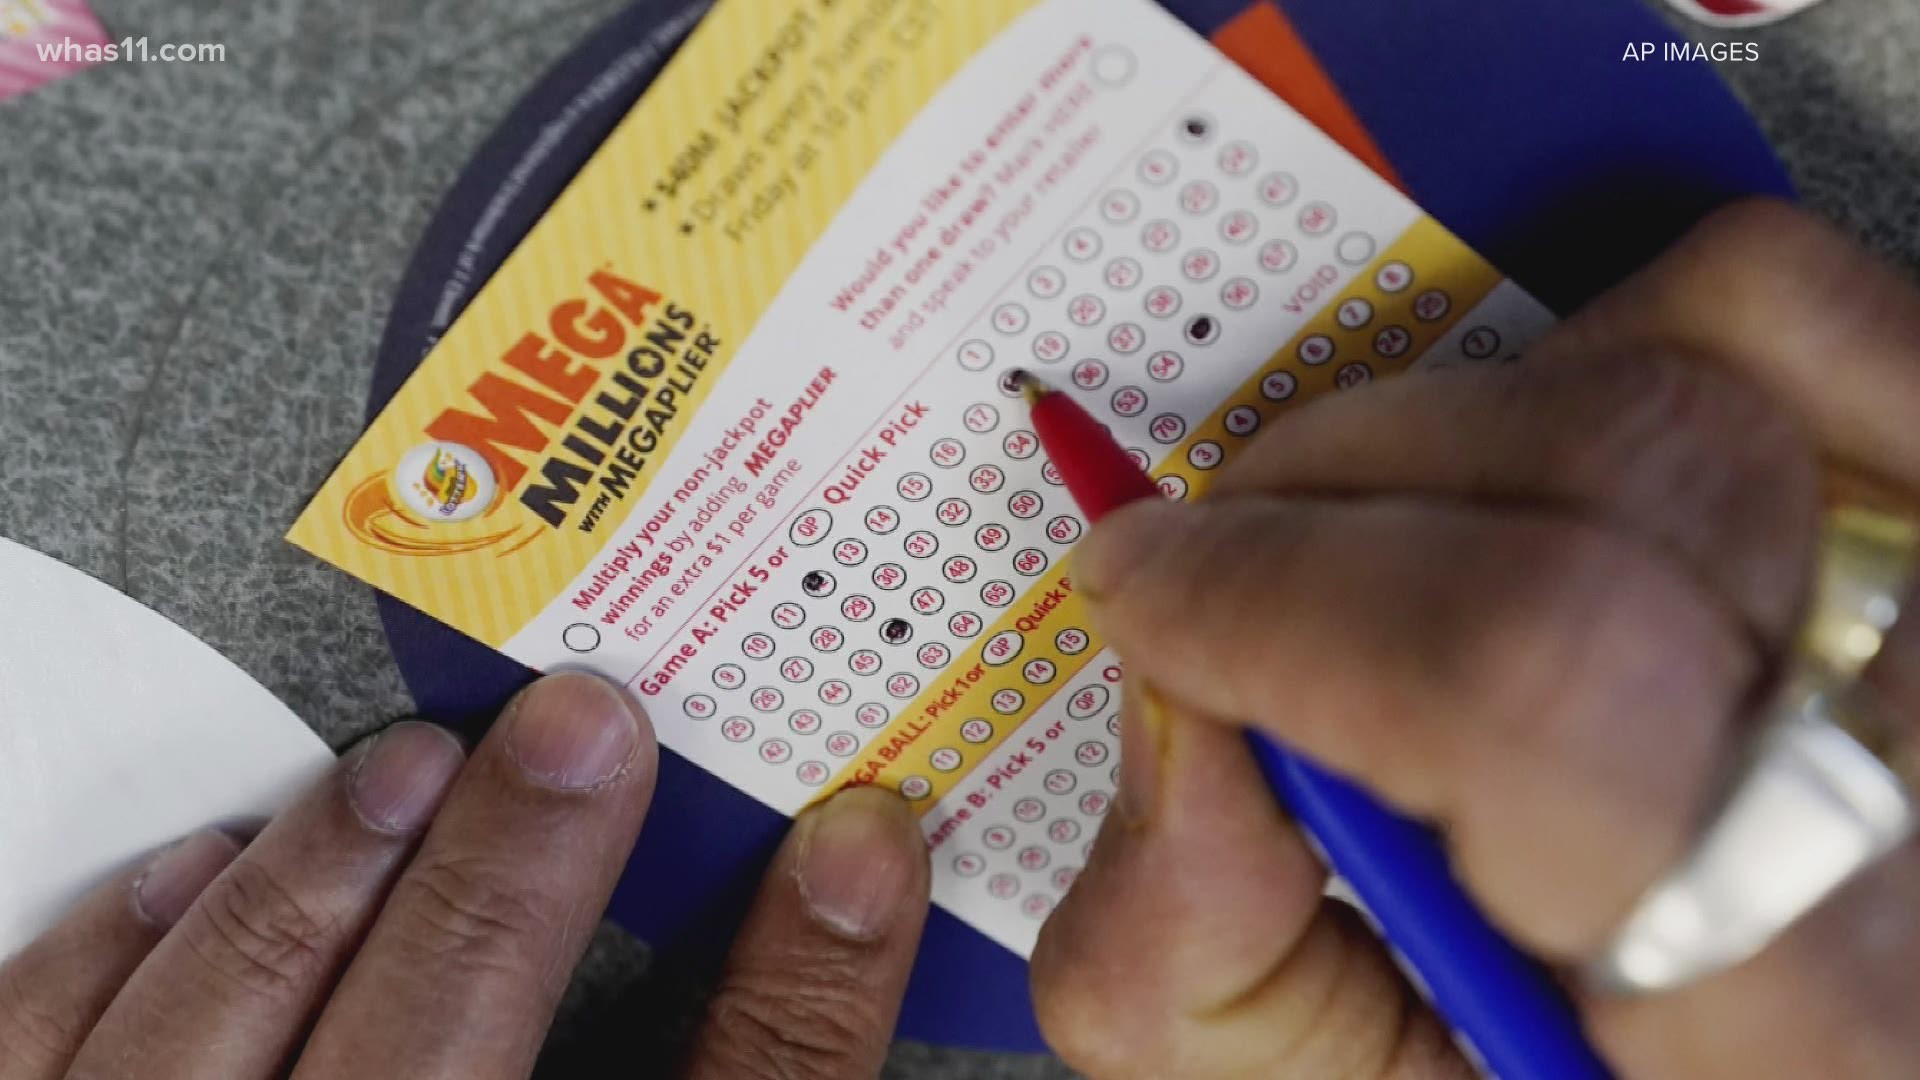 The MegaMillions and Powerball jackpots keep going. What would you do if you won millions of dollars?